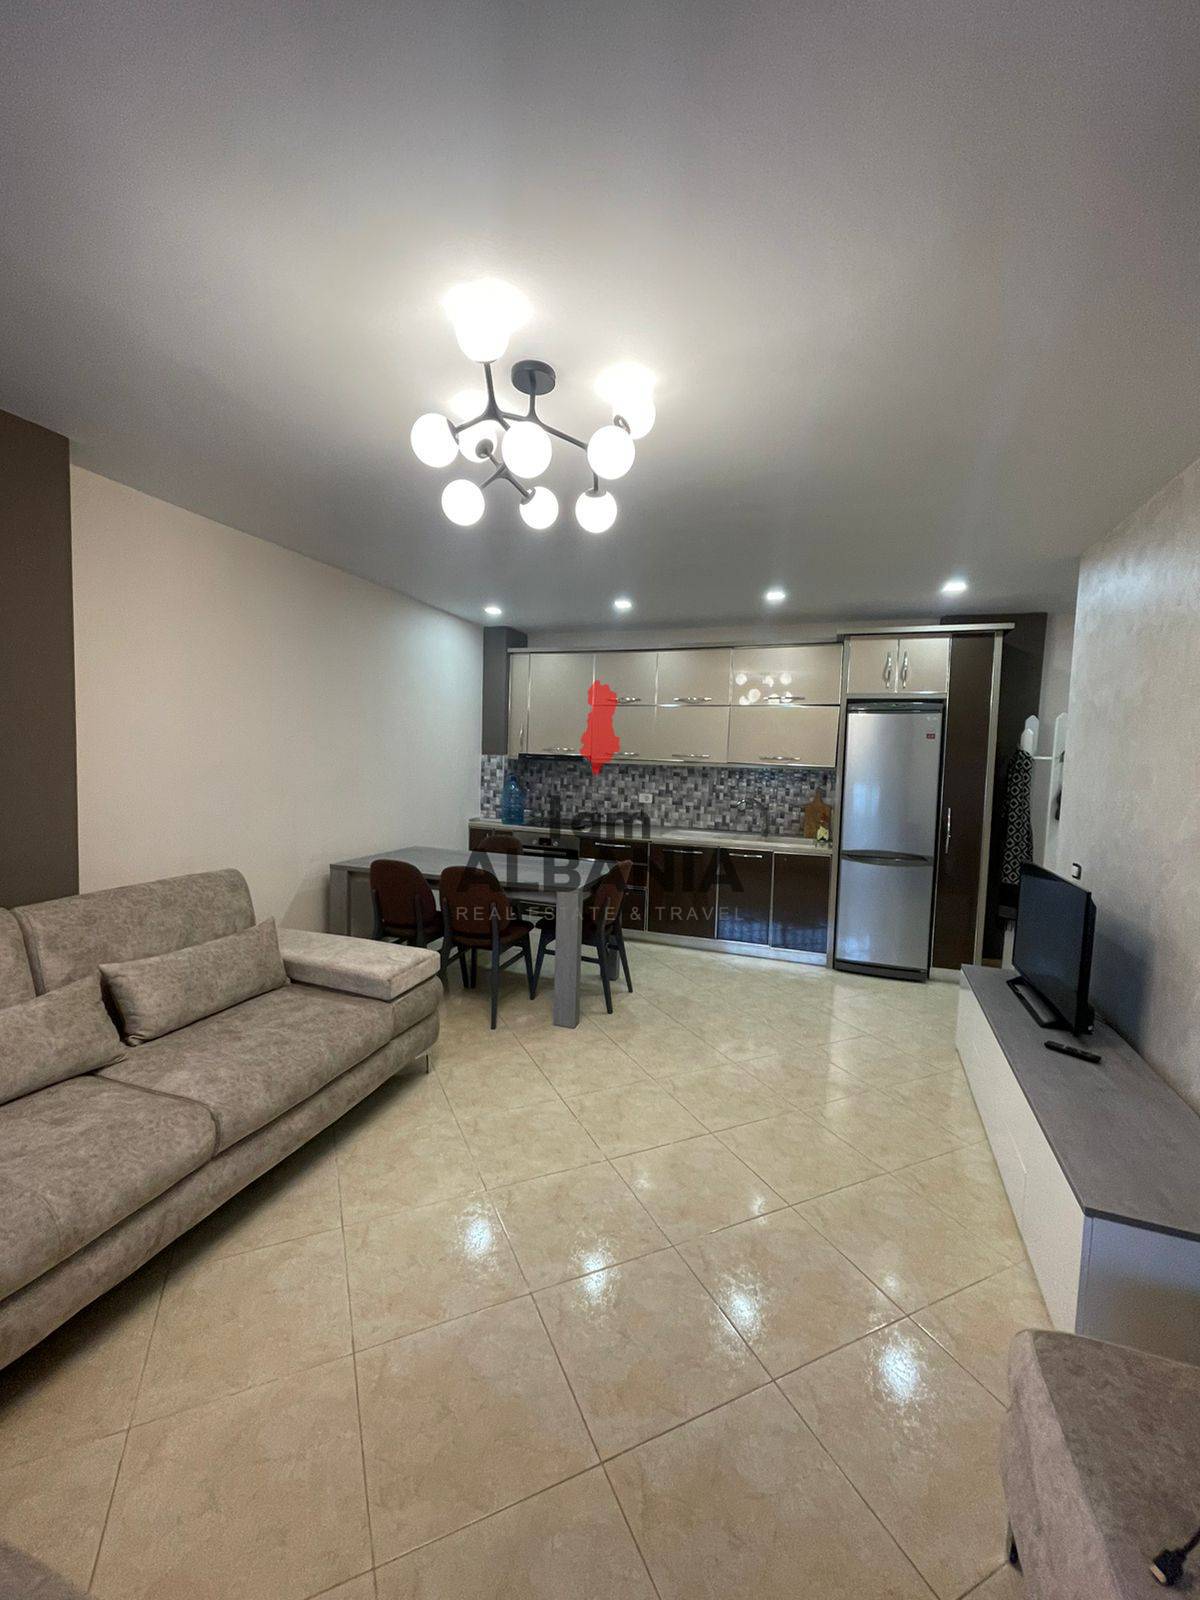 Albania, 2-room apartment with an area of 70 m2